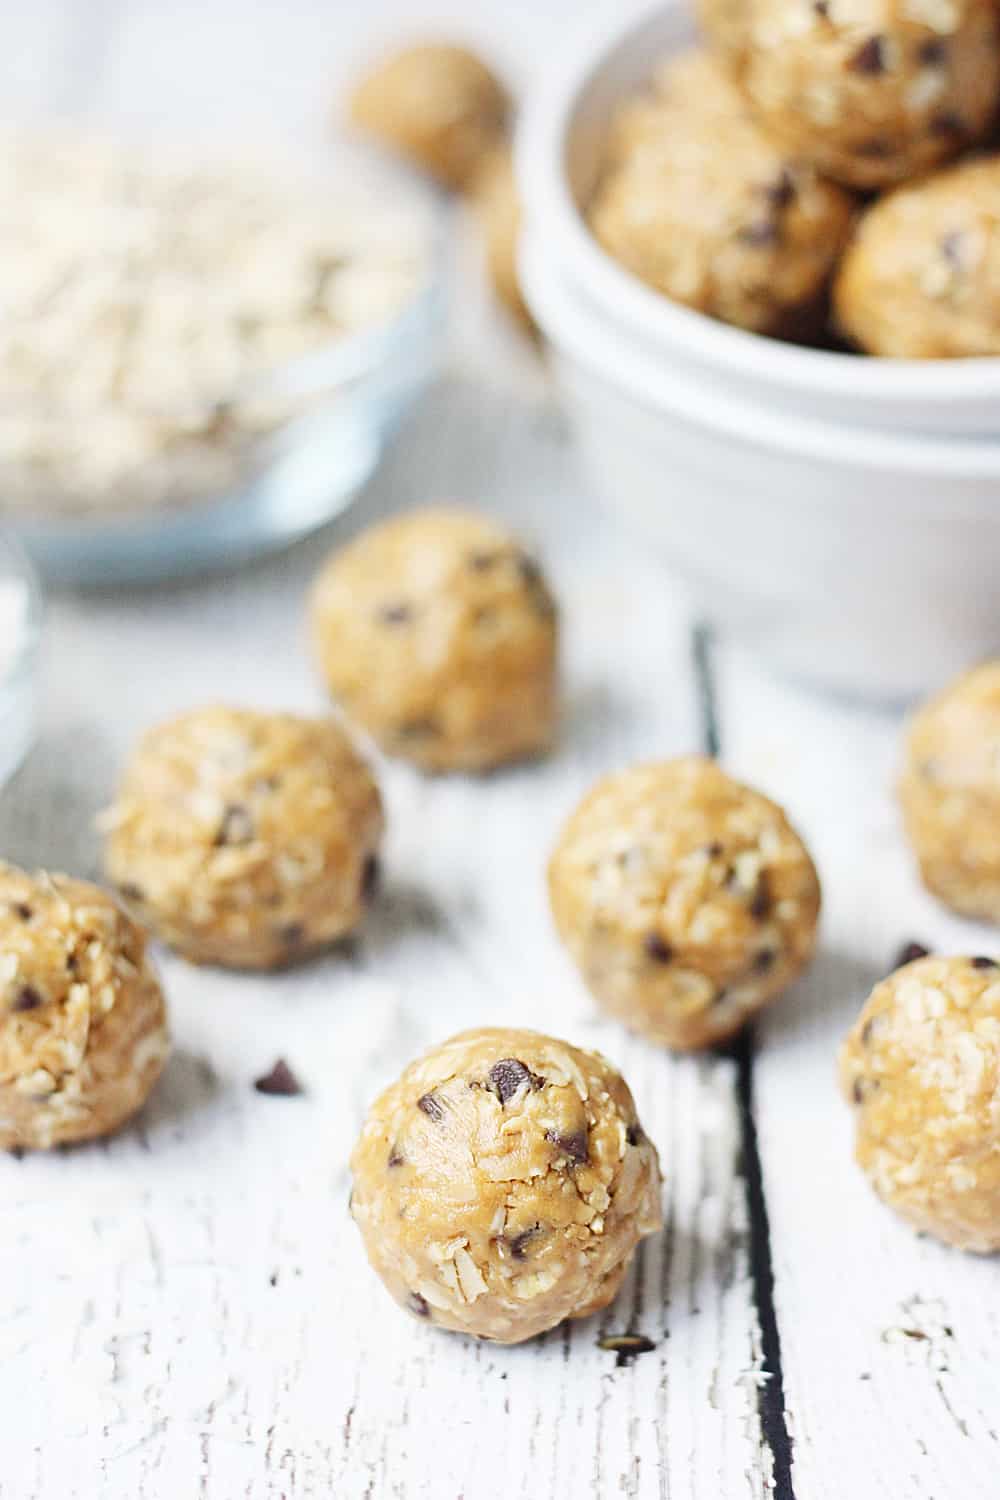 Double Peanut Butter Protein Balls -- Double peanut butter protein balls are full of flavor but not full of sugar or carbs. Make them up to a week ahead for a quick, healthy, on-the-go snack!